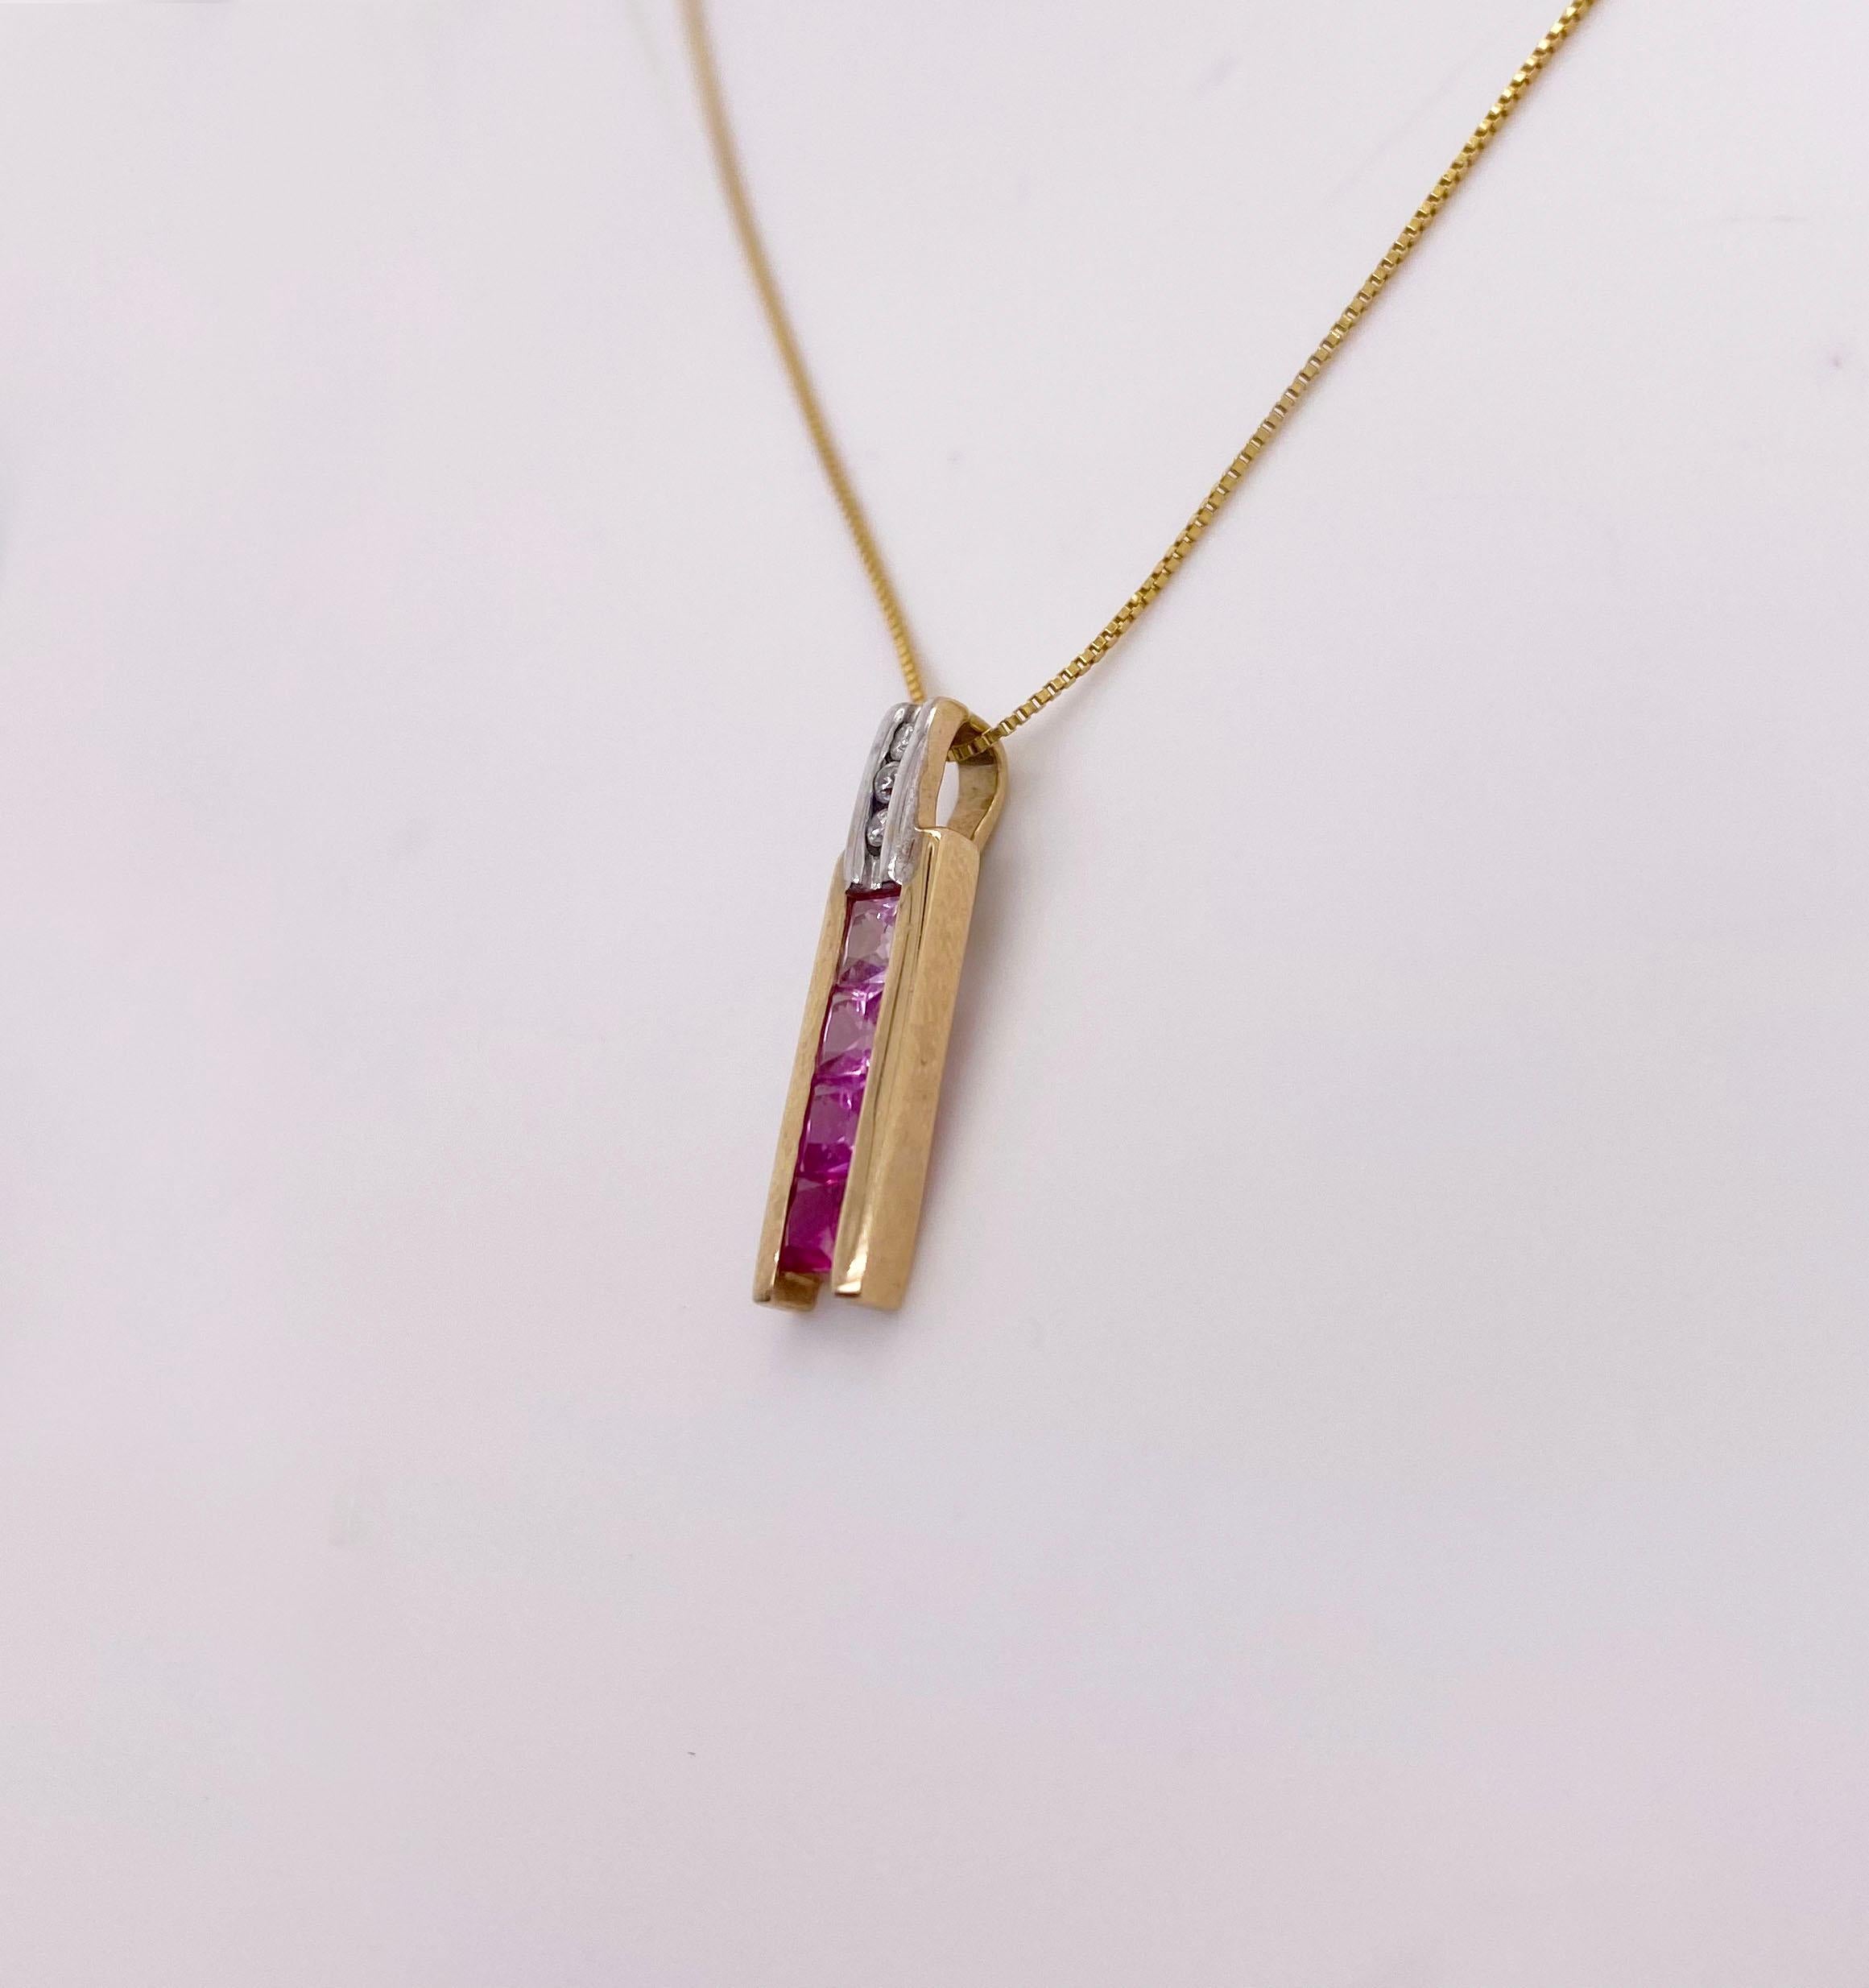 This necklace is gorgeous with it's graduating light pink to dark pink sapphires.
The details for this beautiful necklace are listed below:
Metal Quality: 14 kt Yellow Gold 
Pendant Style: Box Pendant 
Diamond Number: 3 
Diamond Shape: Round